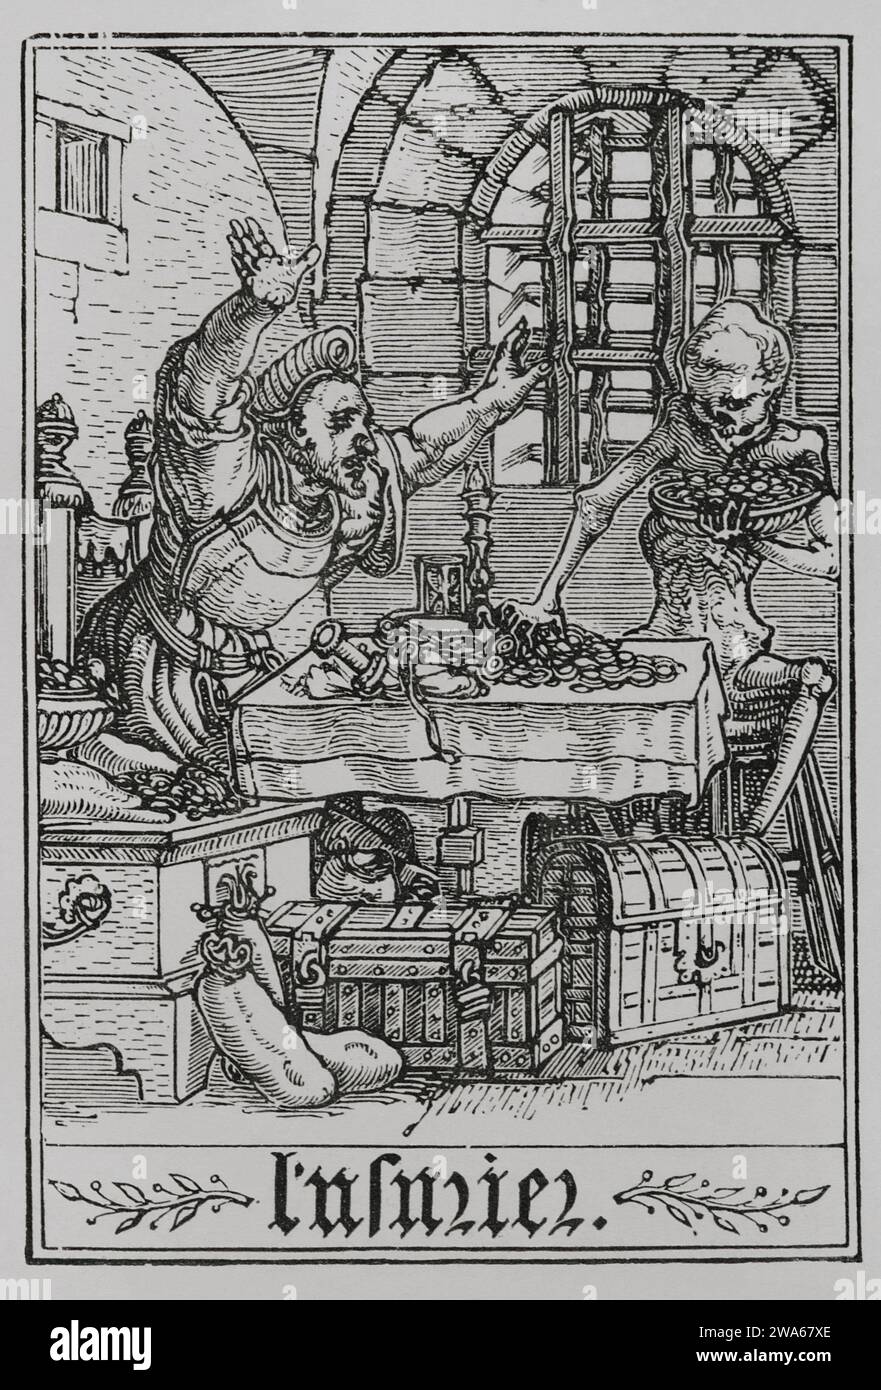 The Miser. Depiction of a rich man who has locked himself in a room with barred windows. Coins, chests and bags of money all around him. A skeleton is trying to take coins from the table, being rebuked by the man who does not seem to be afraid of it. Facsimile of an engraving belonging to the series 'The Dance of Death' by Hans Holbein the Younger, in 'Les Simulachres et Histoires facees de la Mort', 1538. 'Vie Militaire et Religieuse au Moyen Age et a l'Epoque de la Renaissance'. Paris, 1877. Stock Photo